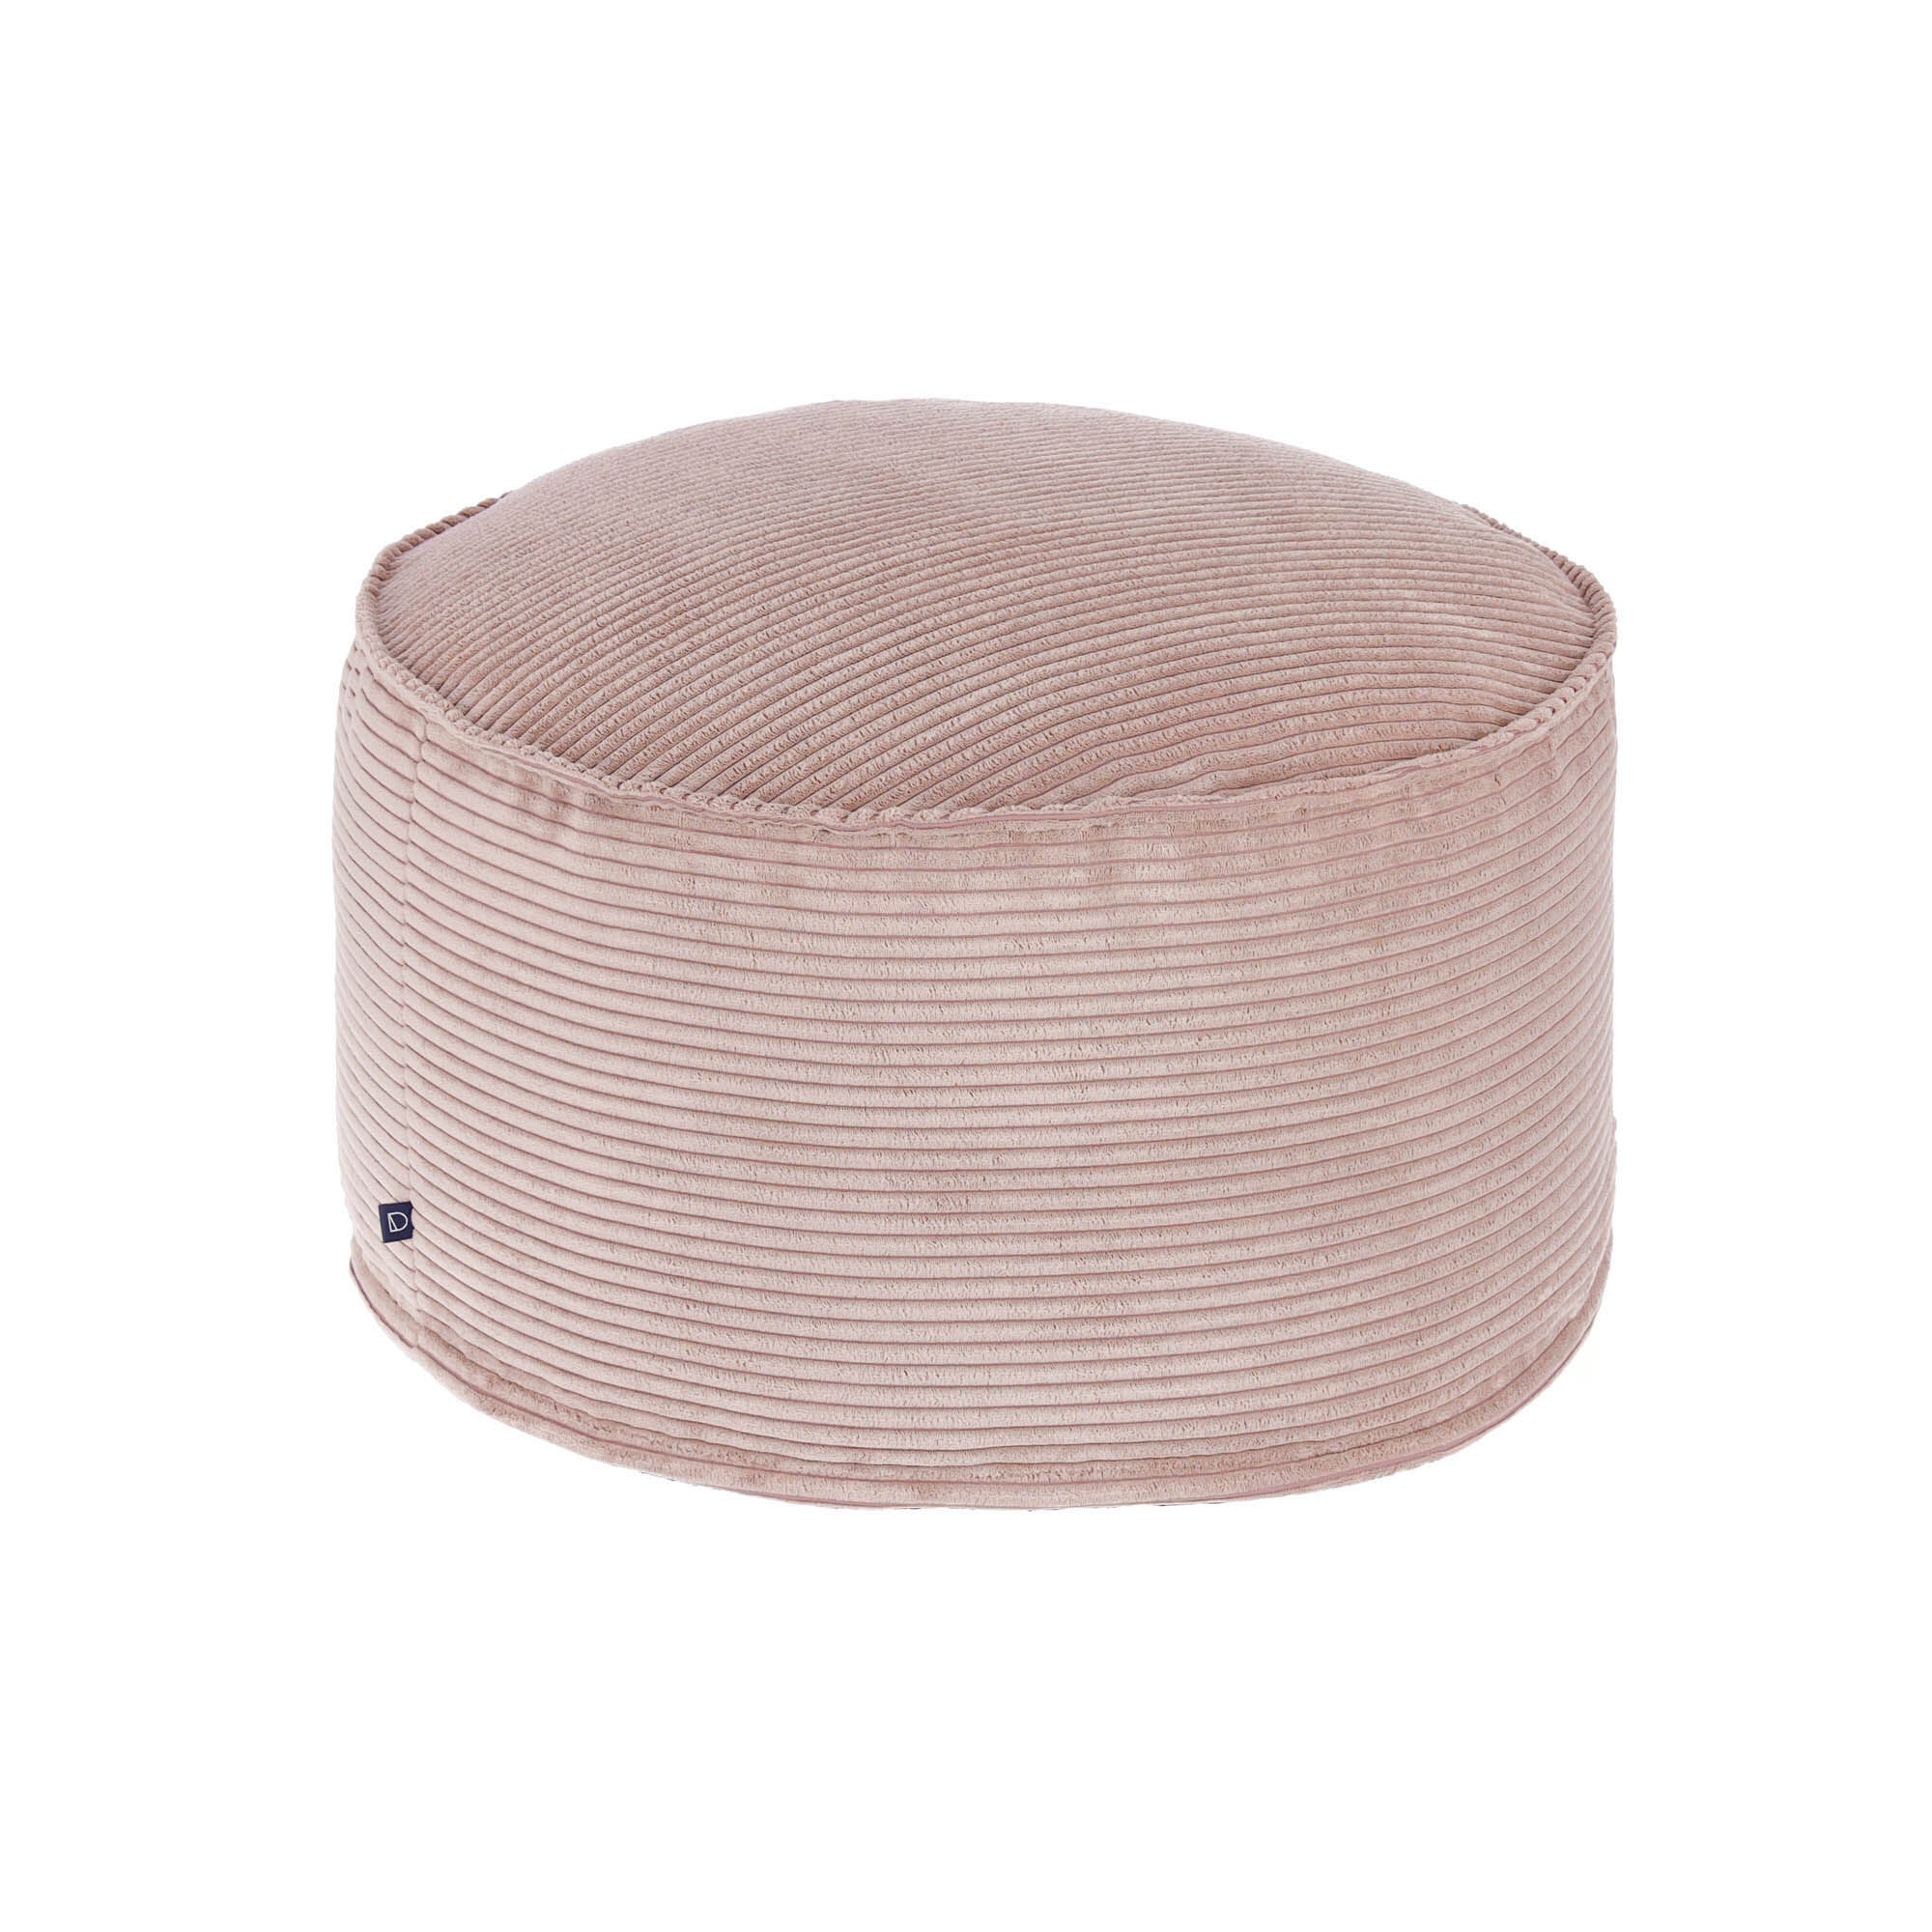 Kave Home Pouf grande Wilma Ø 70 cm velluto a coste rosa